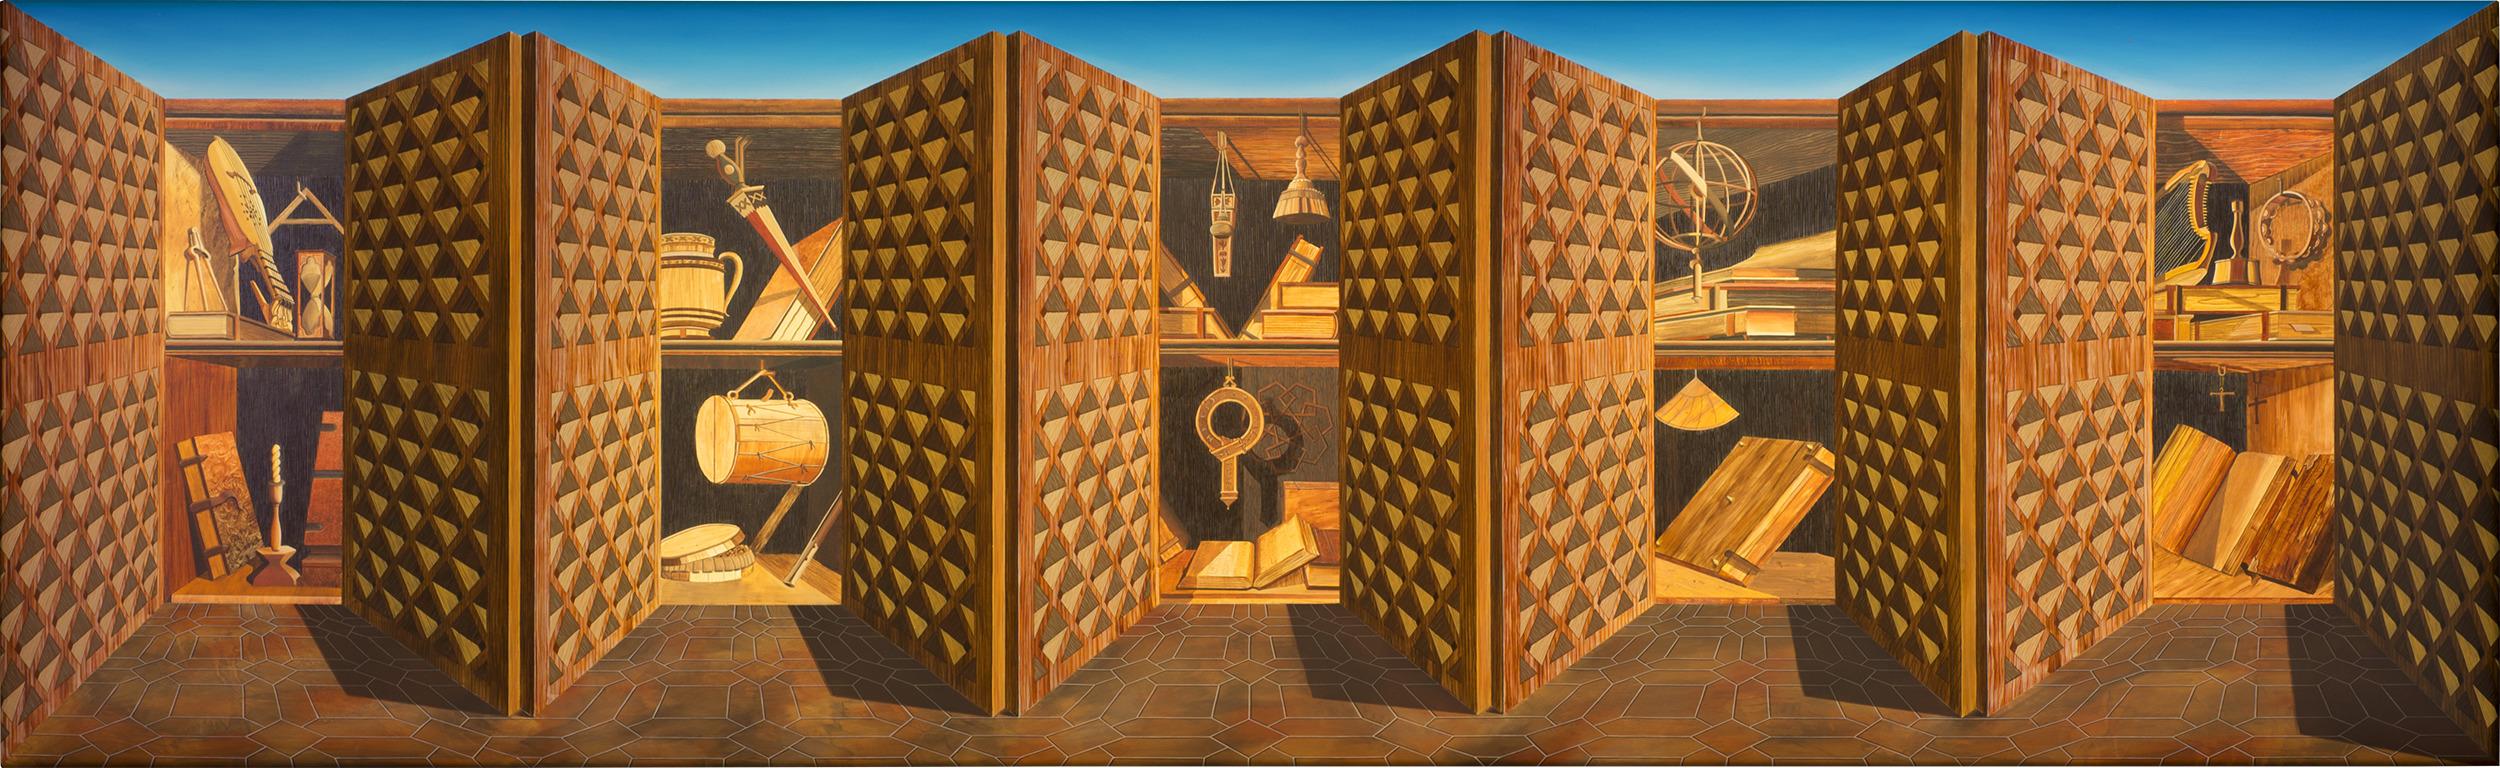 Patrick Hughes
b. 1939  British
A Study of the Studiolo

Oil on board construction

An exploration of the beauty and iconic qualities of Renaissance interiors,A Study of the Studiolo by Patrick Hughes displays a three-dimensional, illusionistic